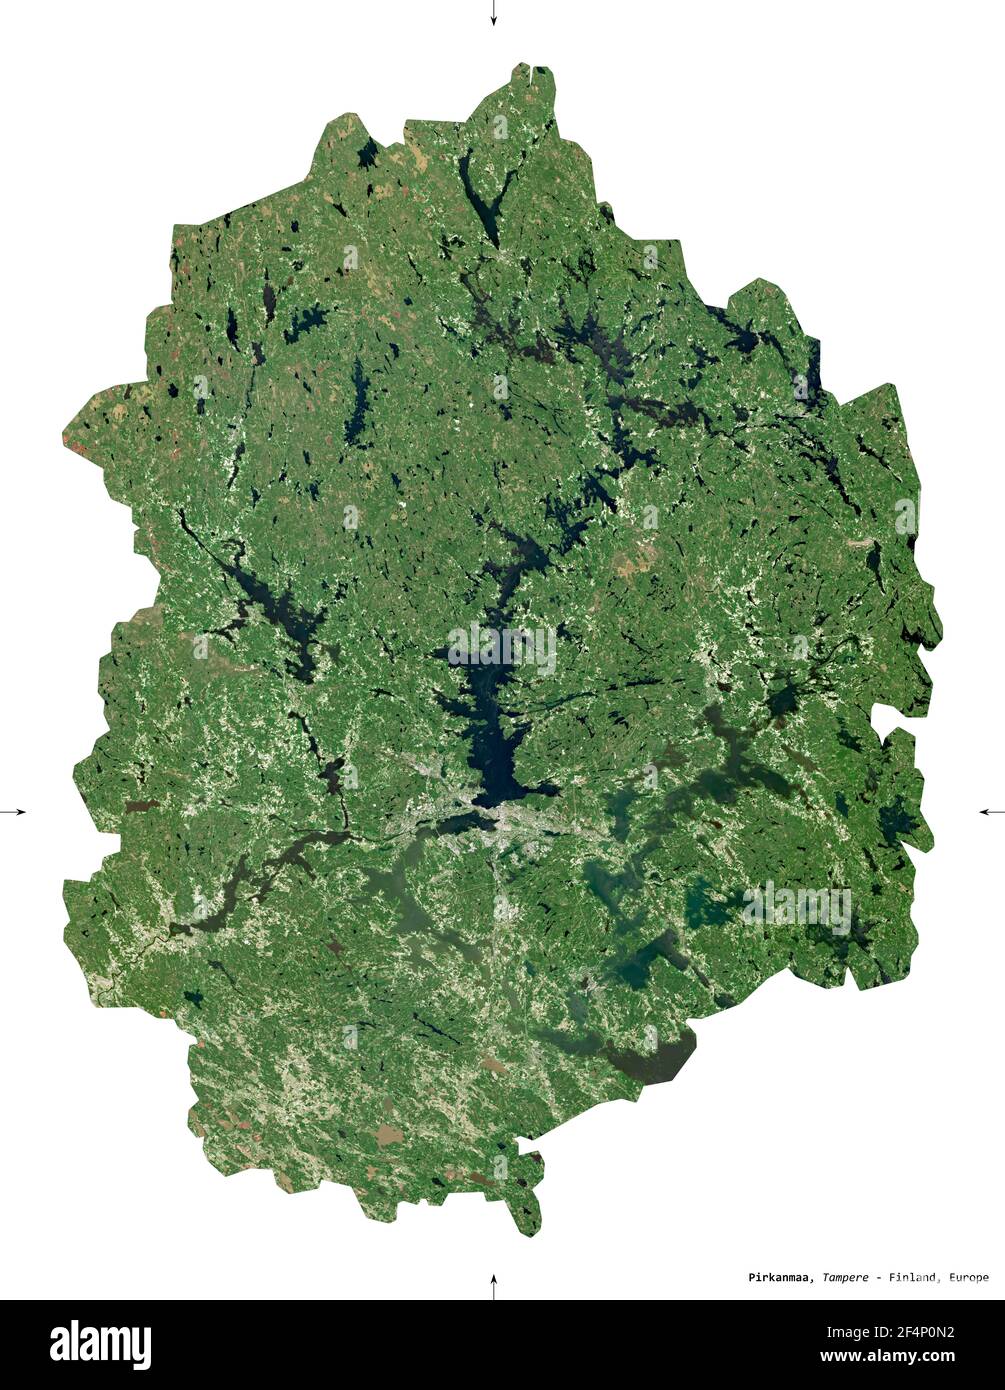 Pirkanmaa, region of Finland. Sentinel-2 satellite imagery. Shape isolated on white. Description, location of the capital. Contains modified Copernicu Stock Photo